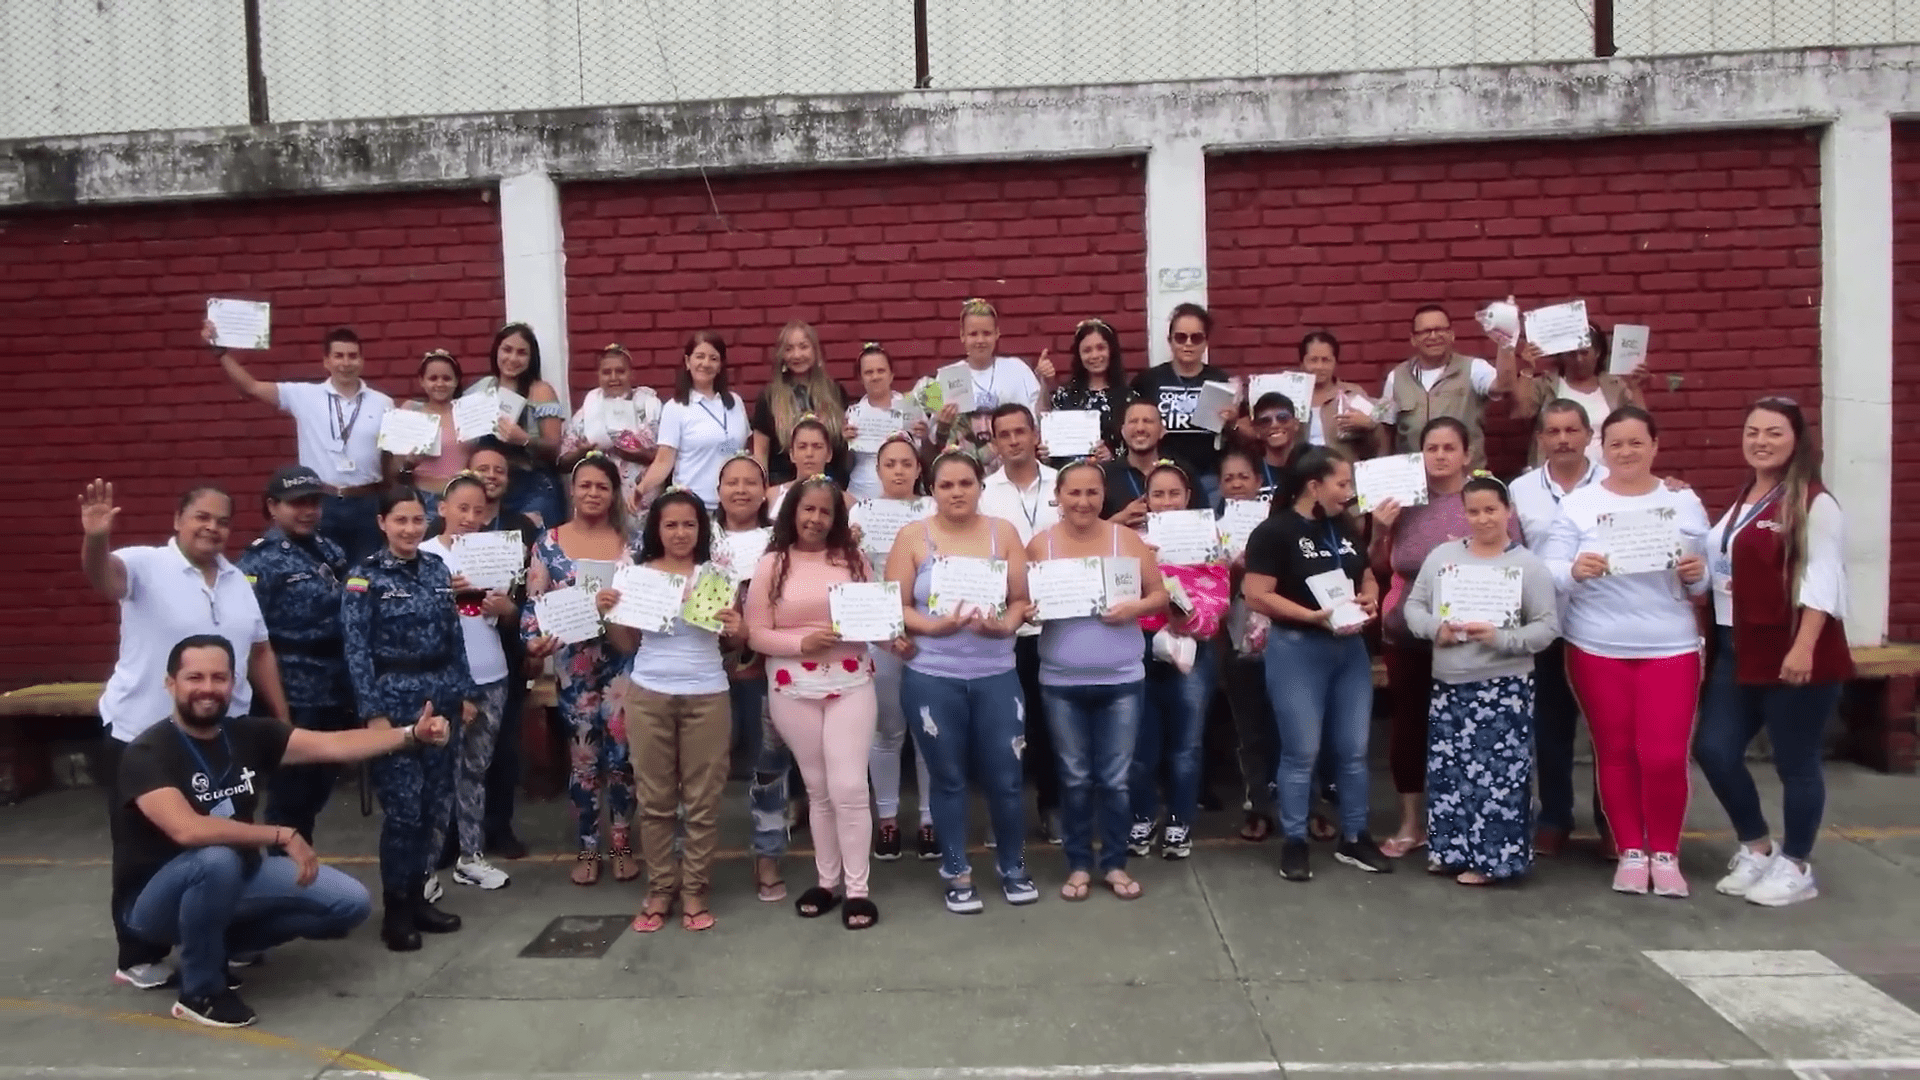 The Church visited the women’s prison in the city of Armenia in Colombia through various programs inside and outside prisons.